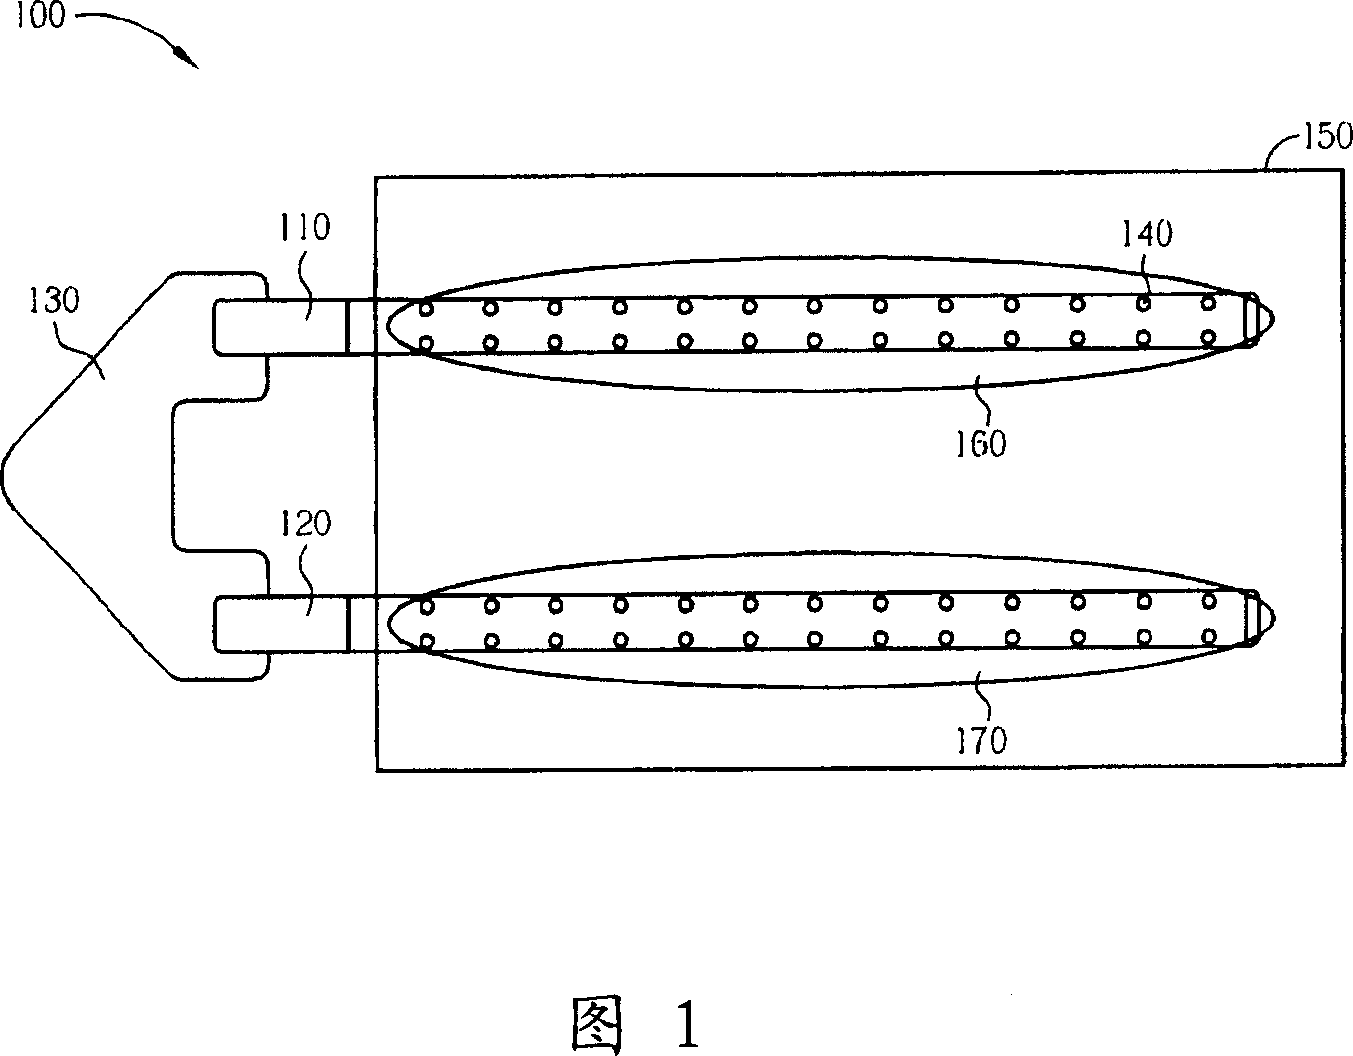 Substrate carrier capable of removing electrostatics